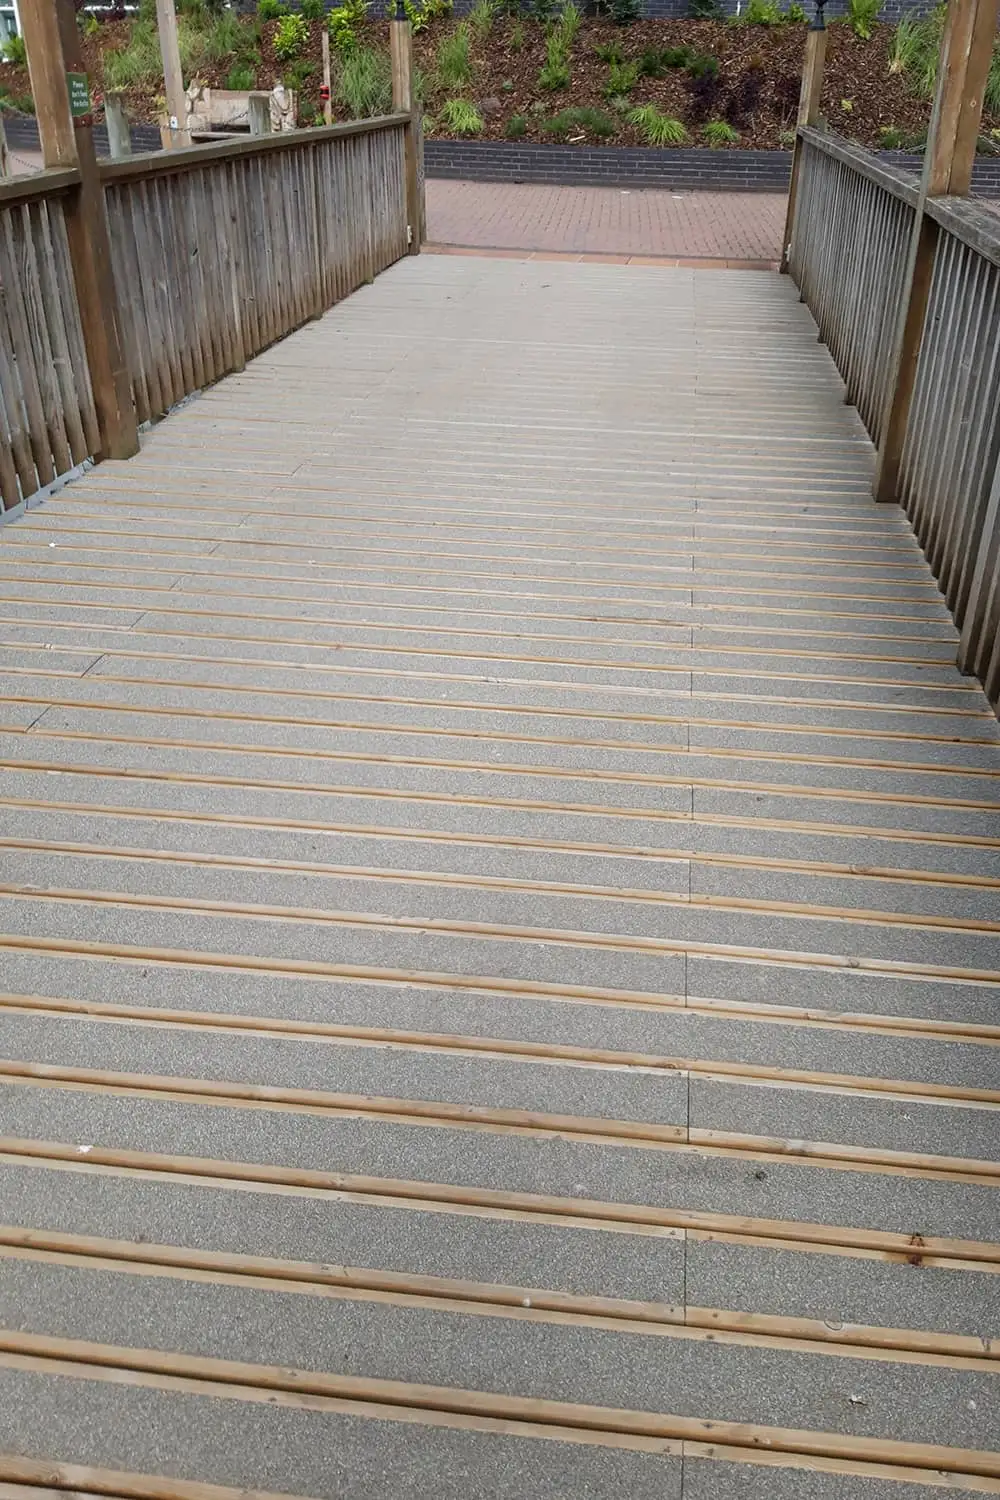 Non-slip decking walkway at Center Parcs Whinfell Forest